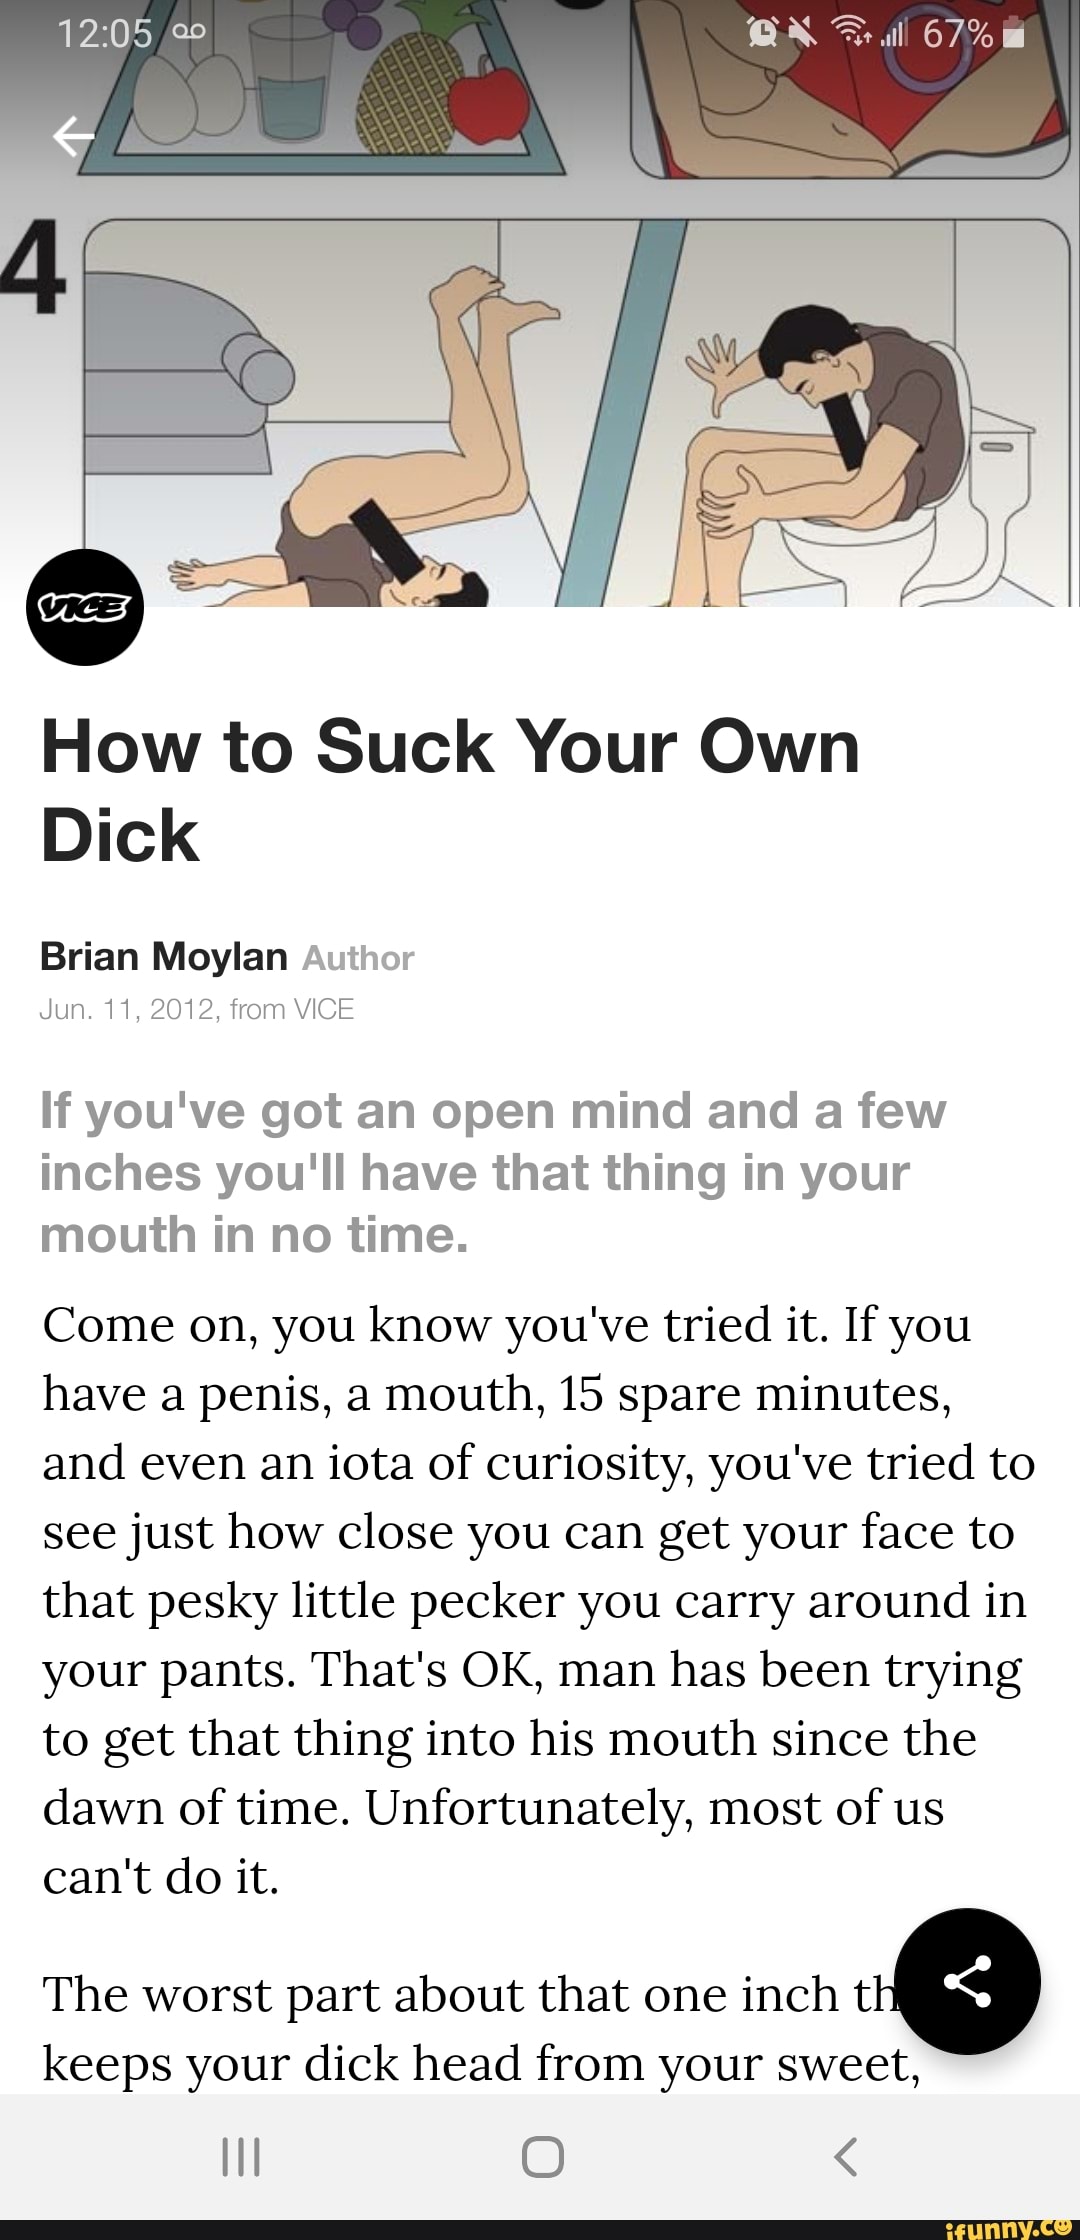 How to suck your own dick if you're fat